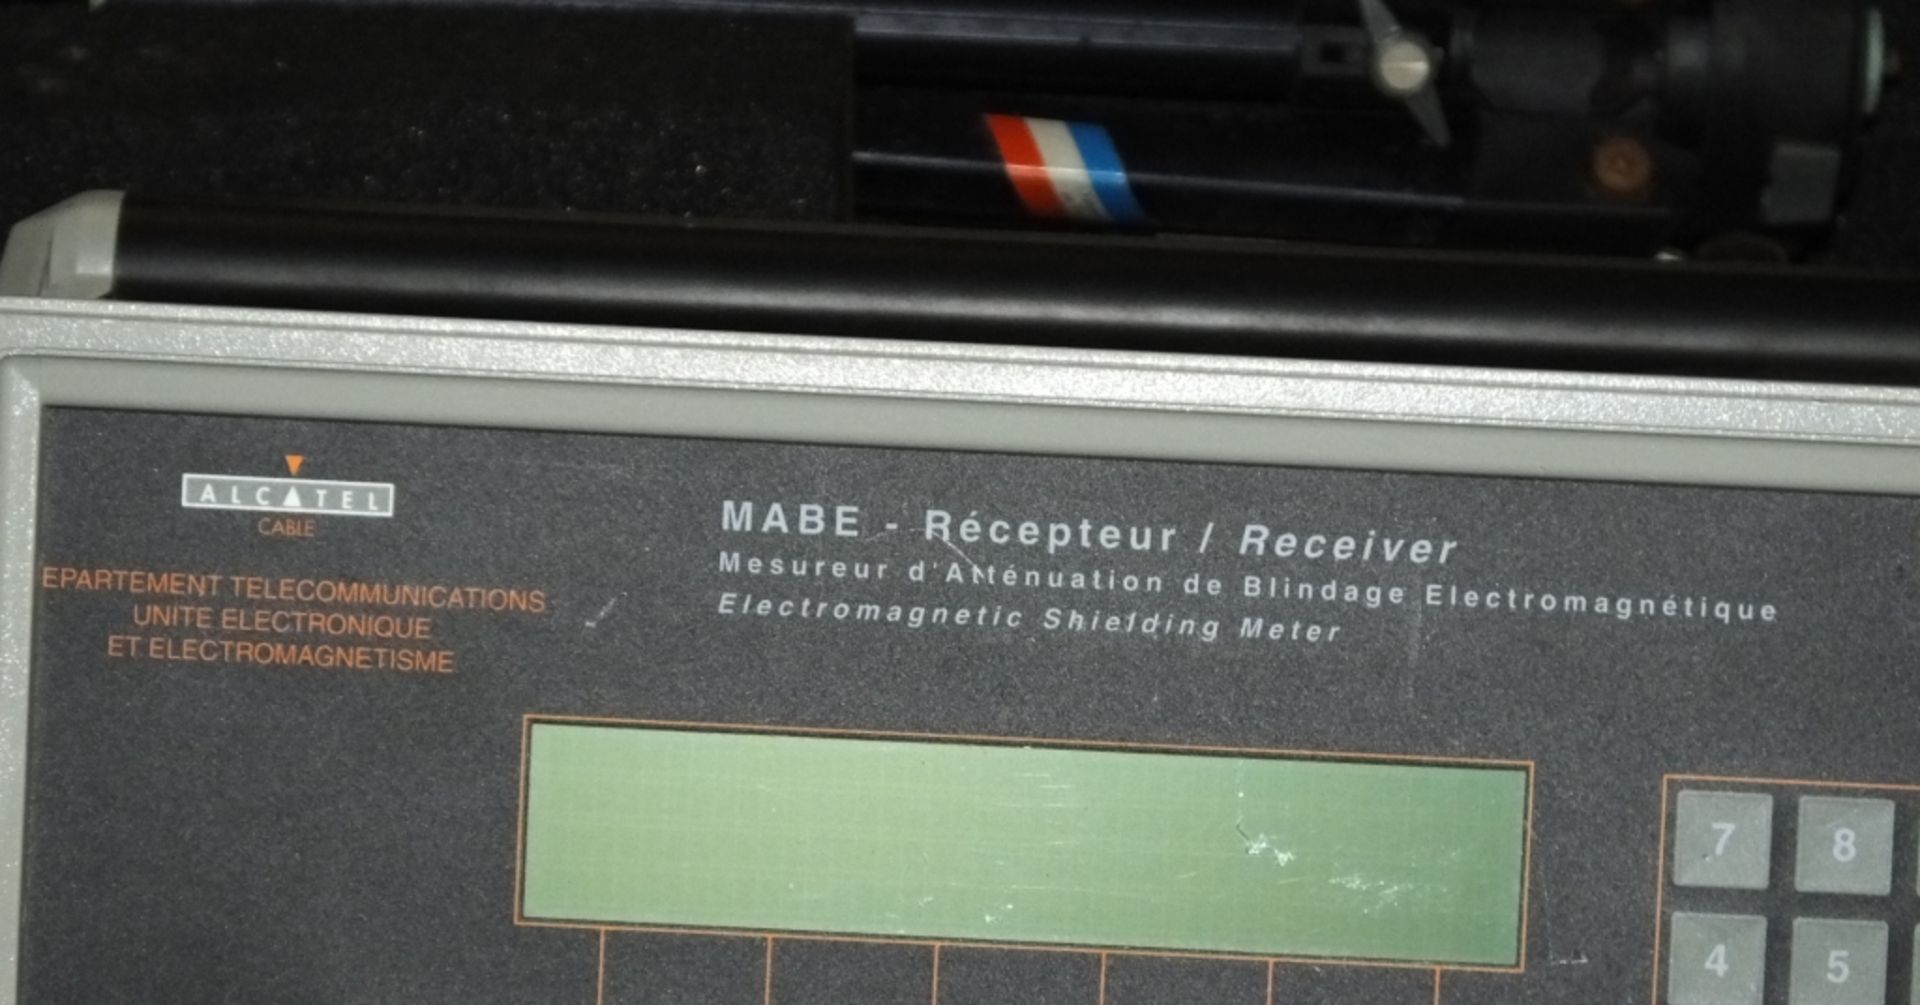 Alcatel EMC Test Receiver - MABE Receiver in case - Image 3 of 4